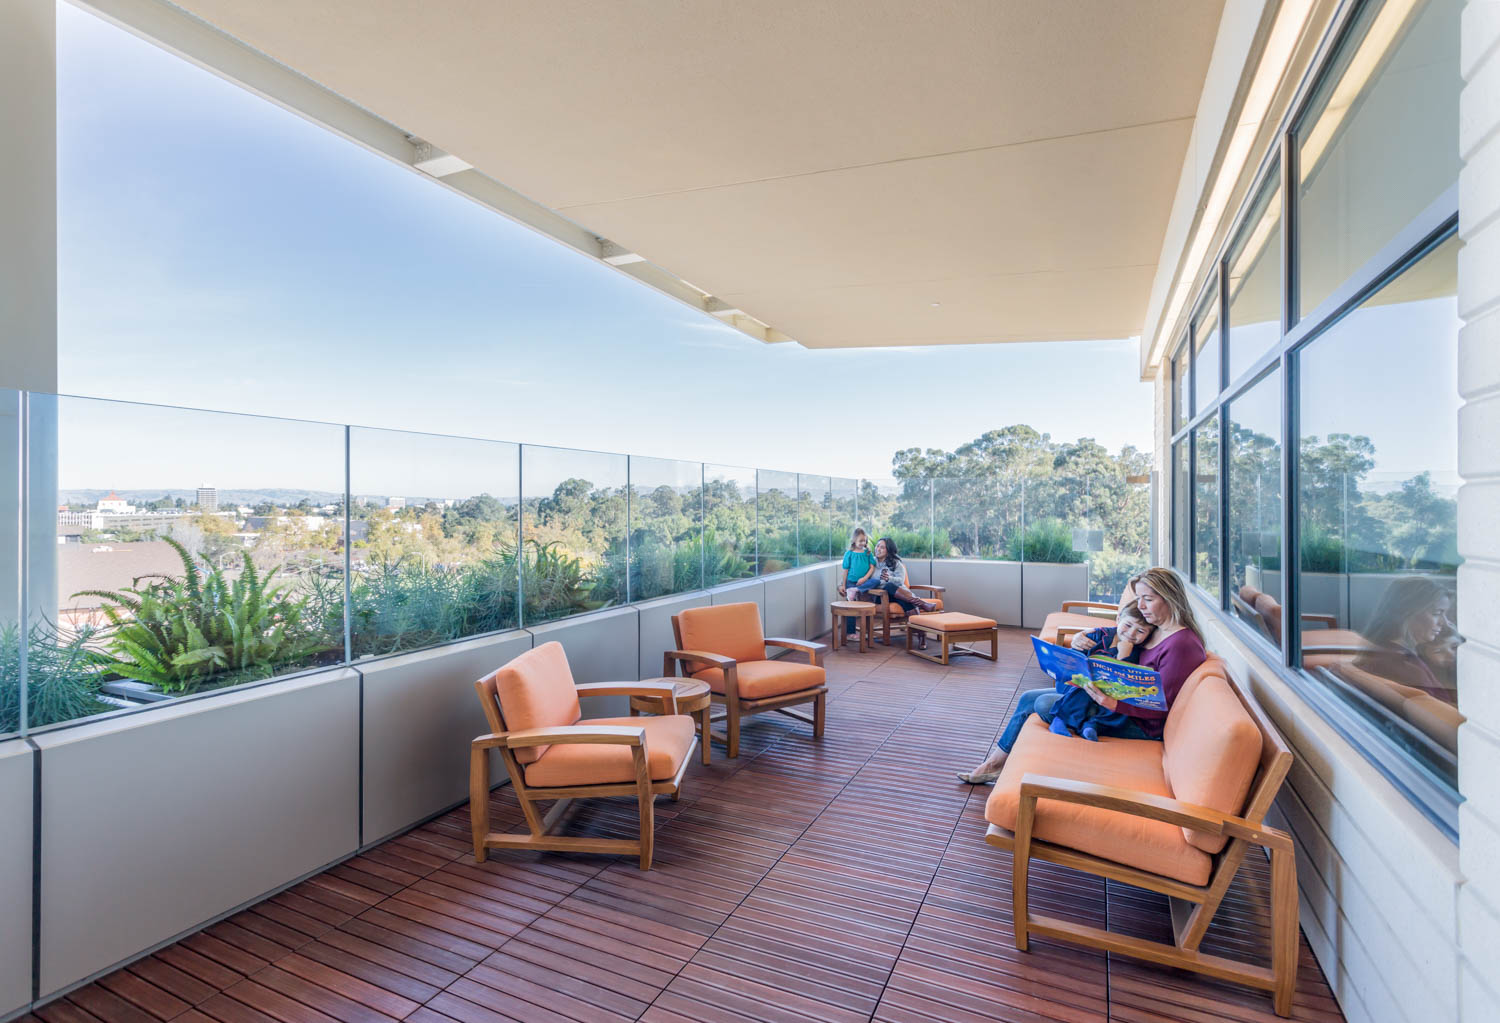 a balcony walkway at Lucile Packard Children's Hospital Stanford